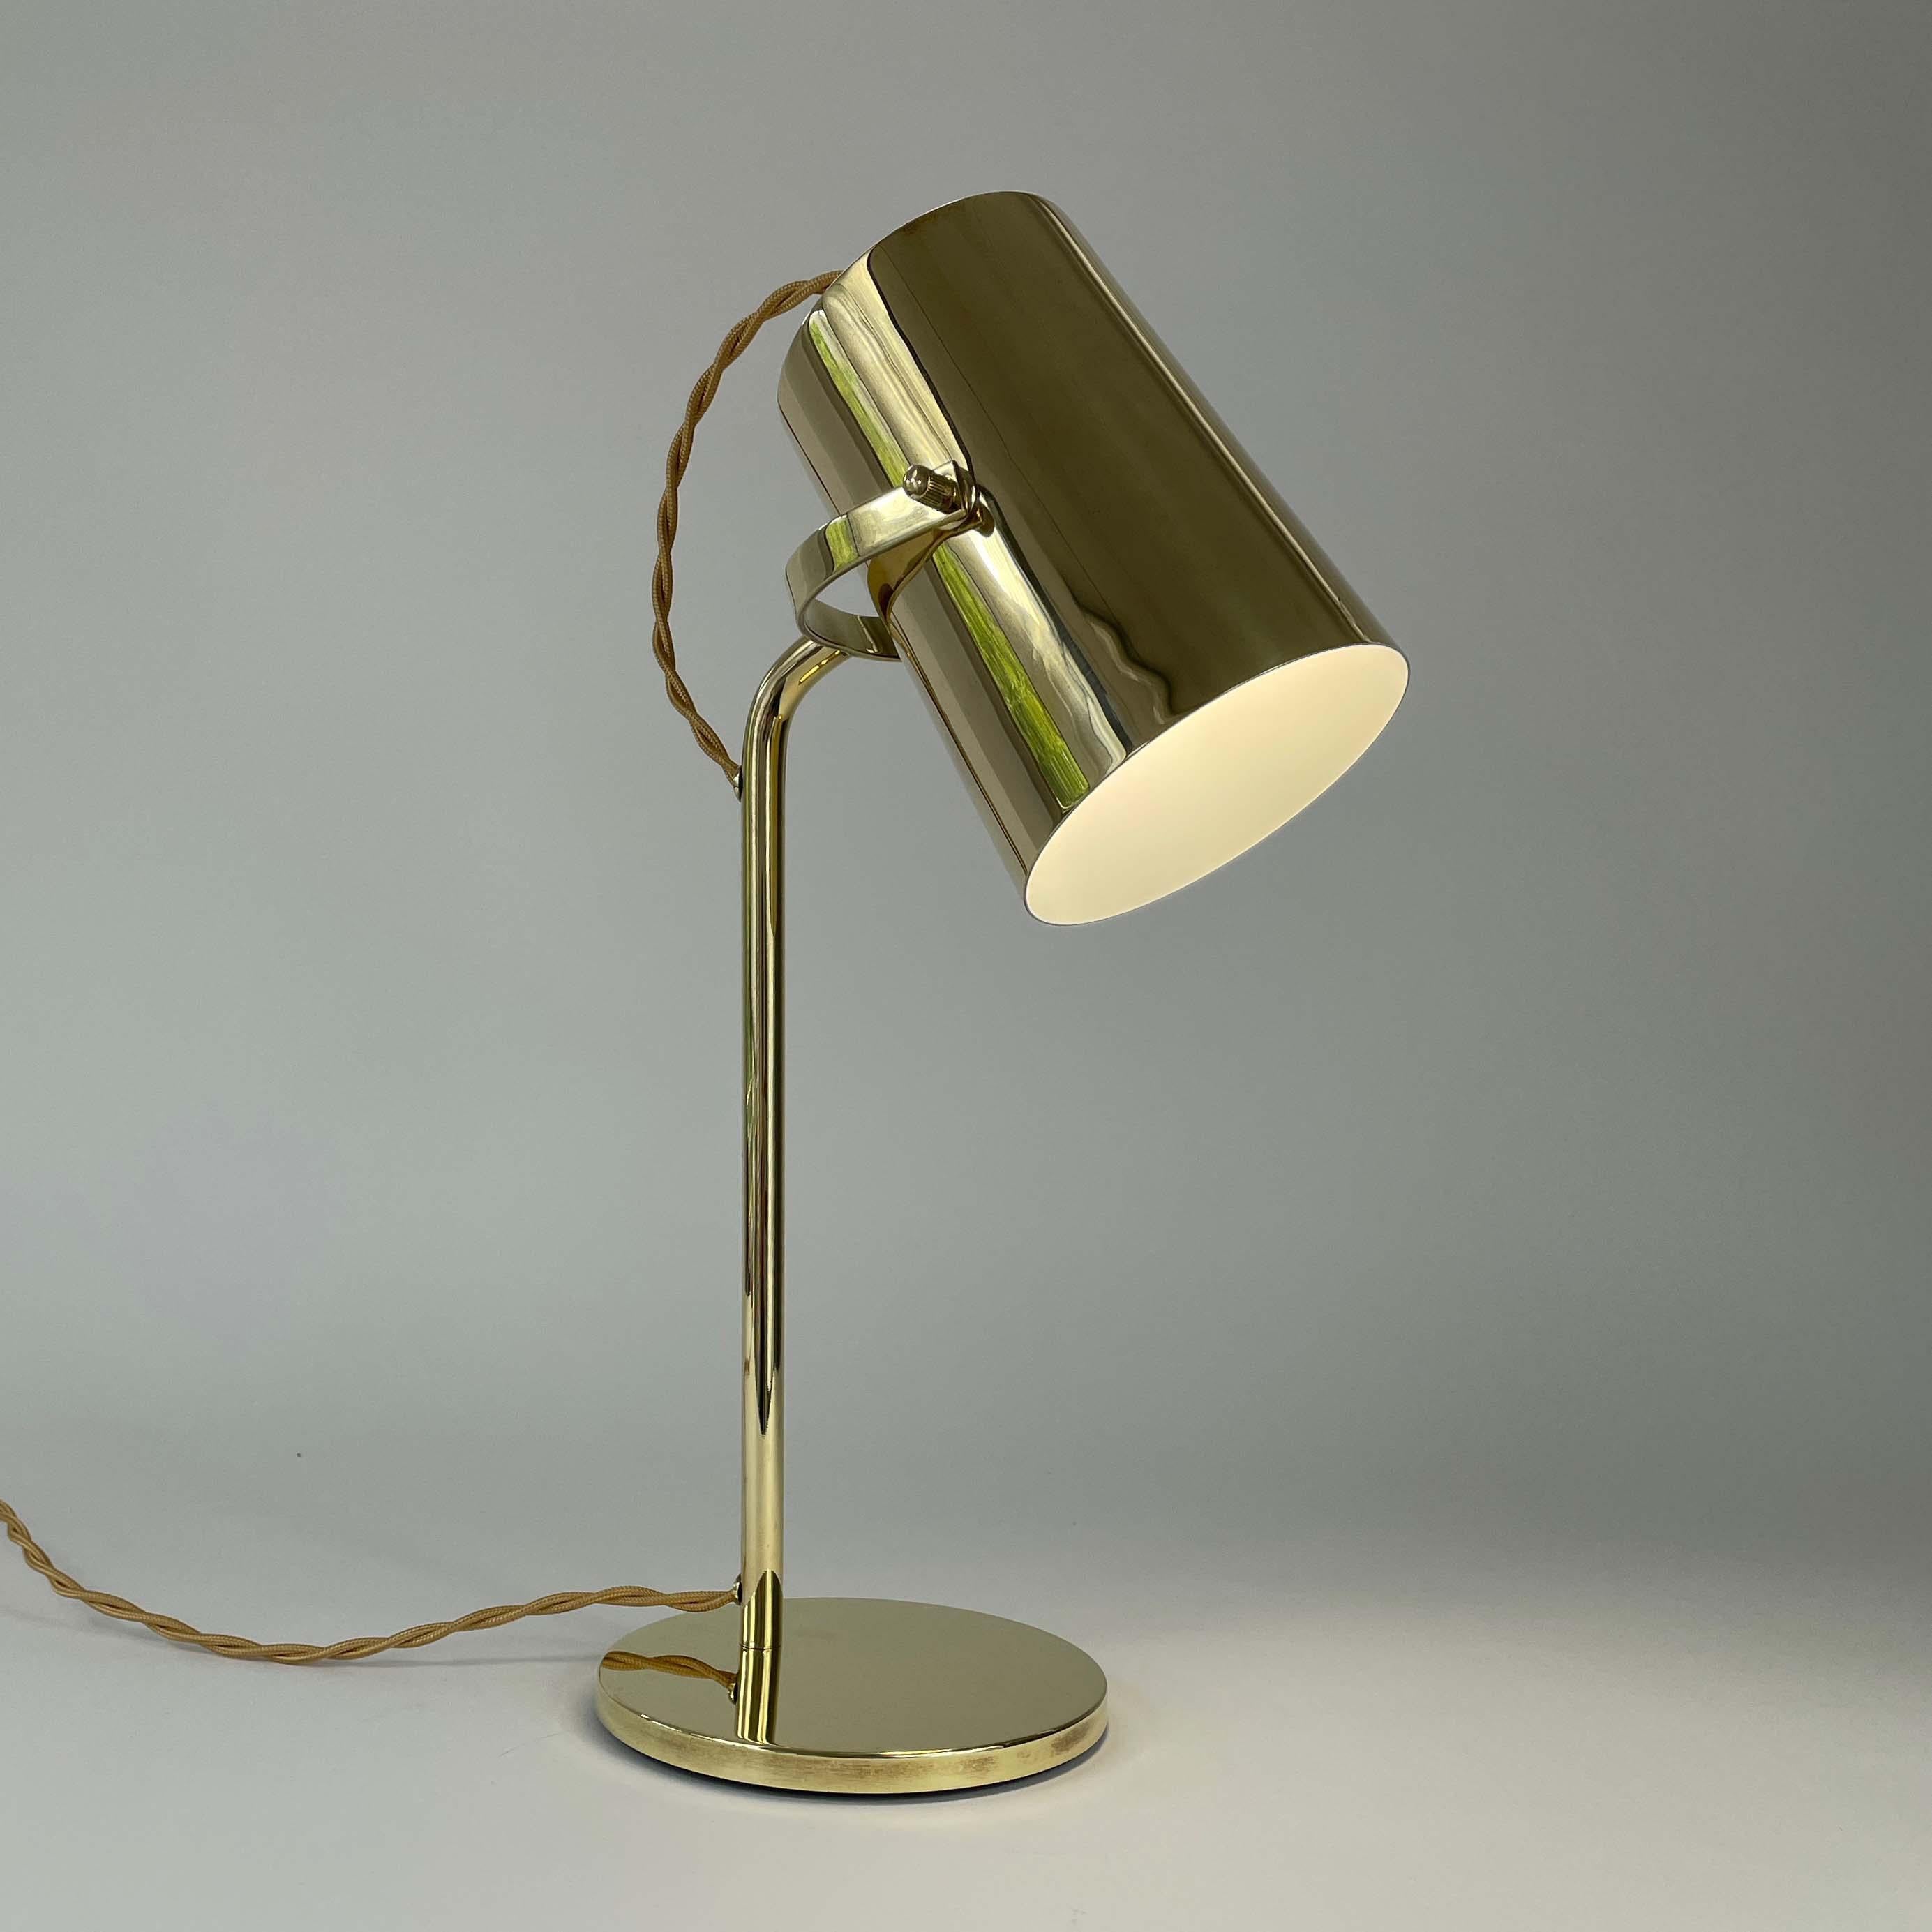 Scandinavian Modern Paavo Tynell Style Adjustable Brass Table Lamp, Finland 1940s For Sale